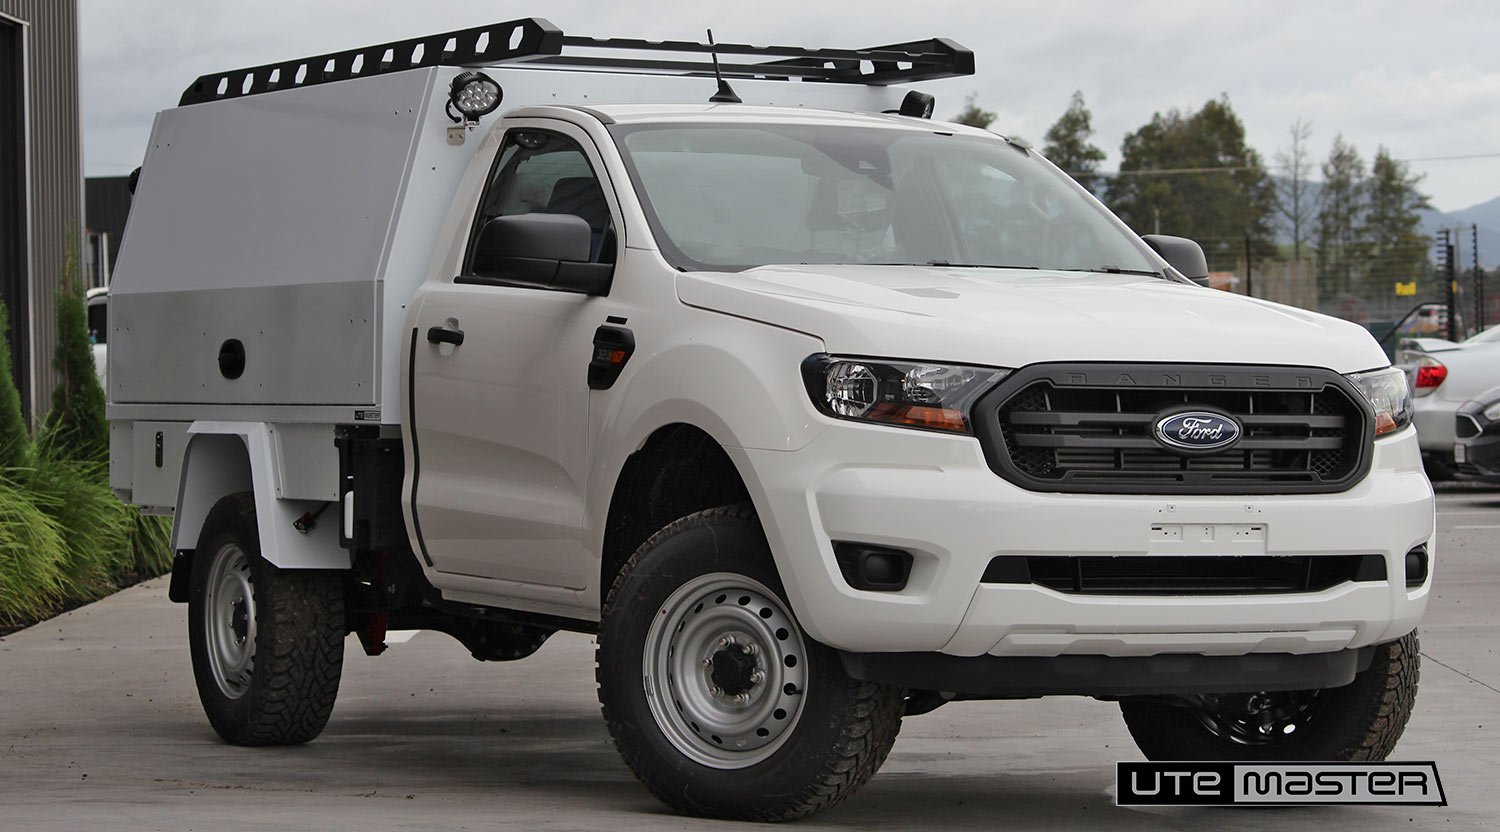 Reduce downtime with a Utemaster Ute Service Body